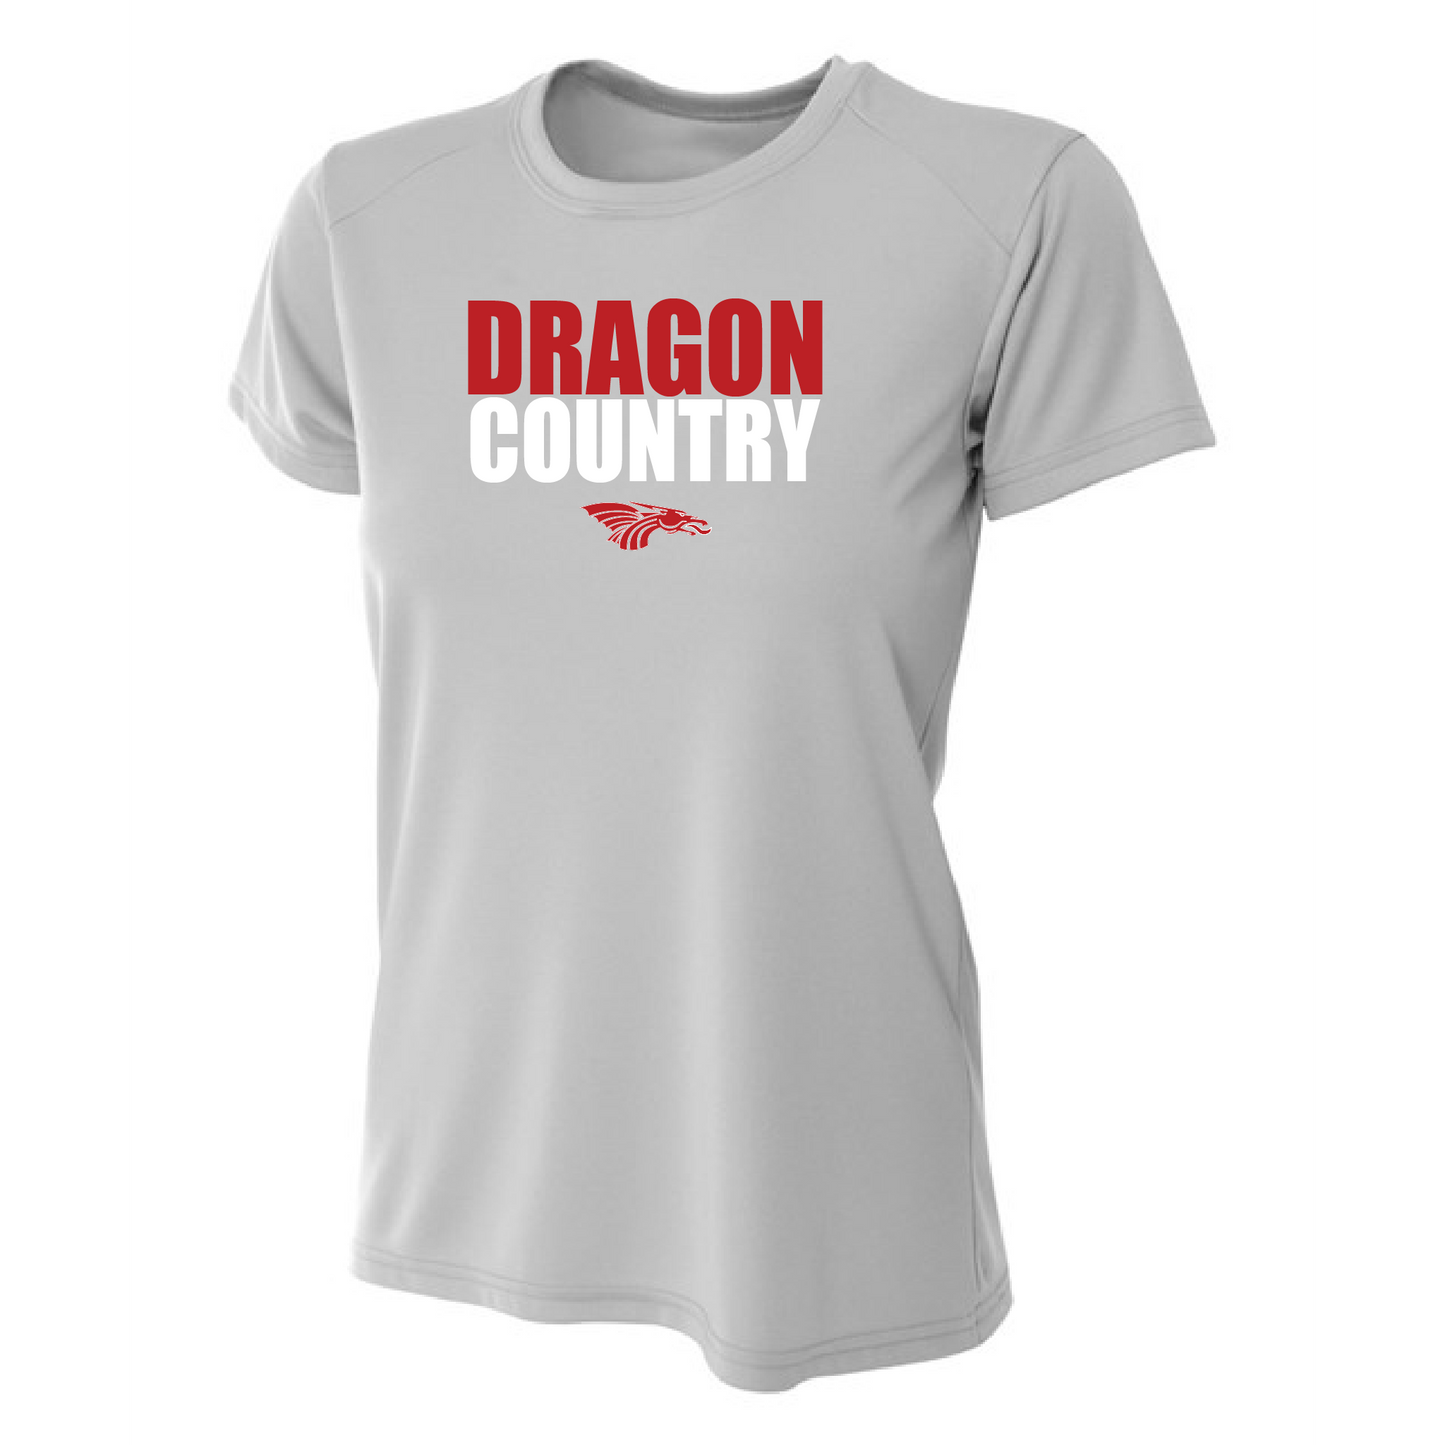 Womens S/S T-Shirt - Dragon Country